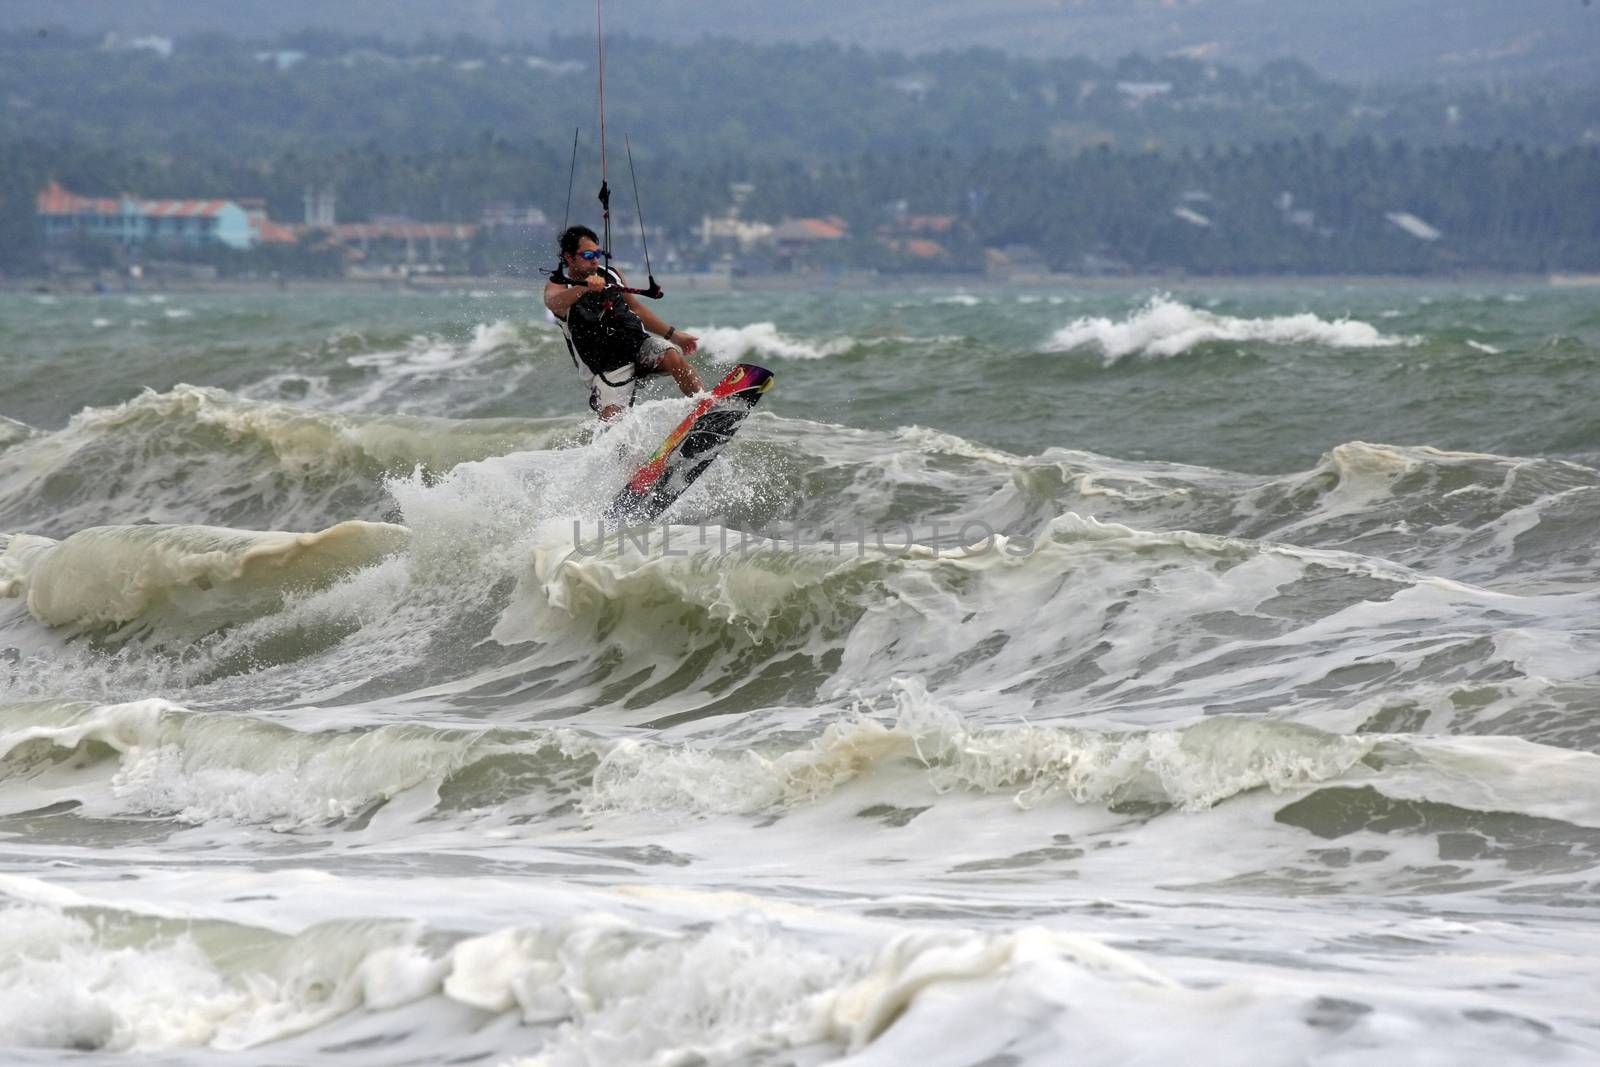 Kitesurfer in action by friday